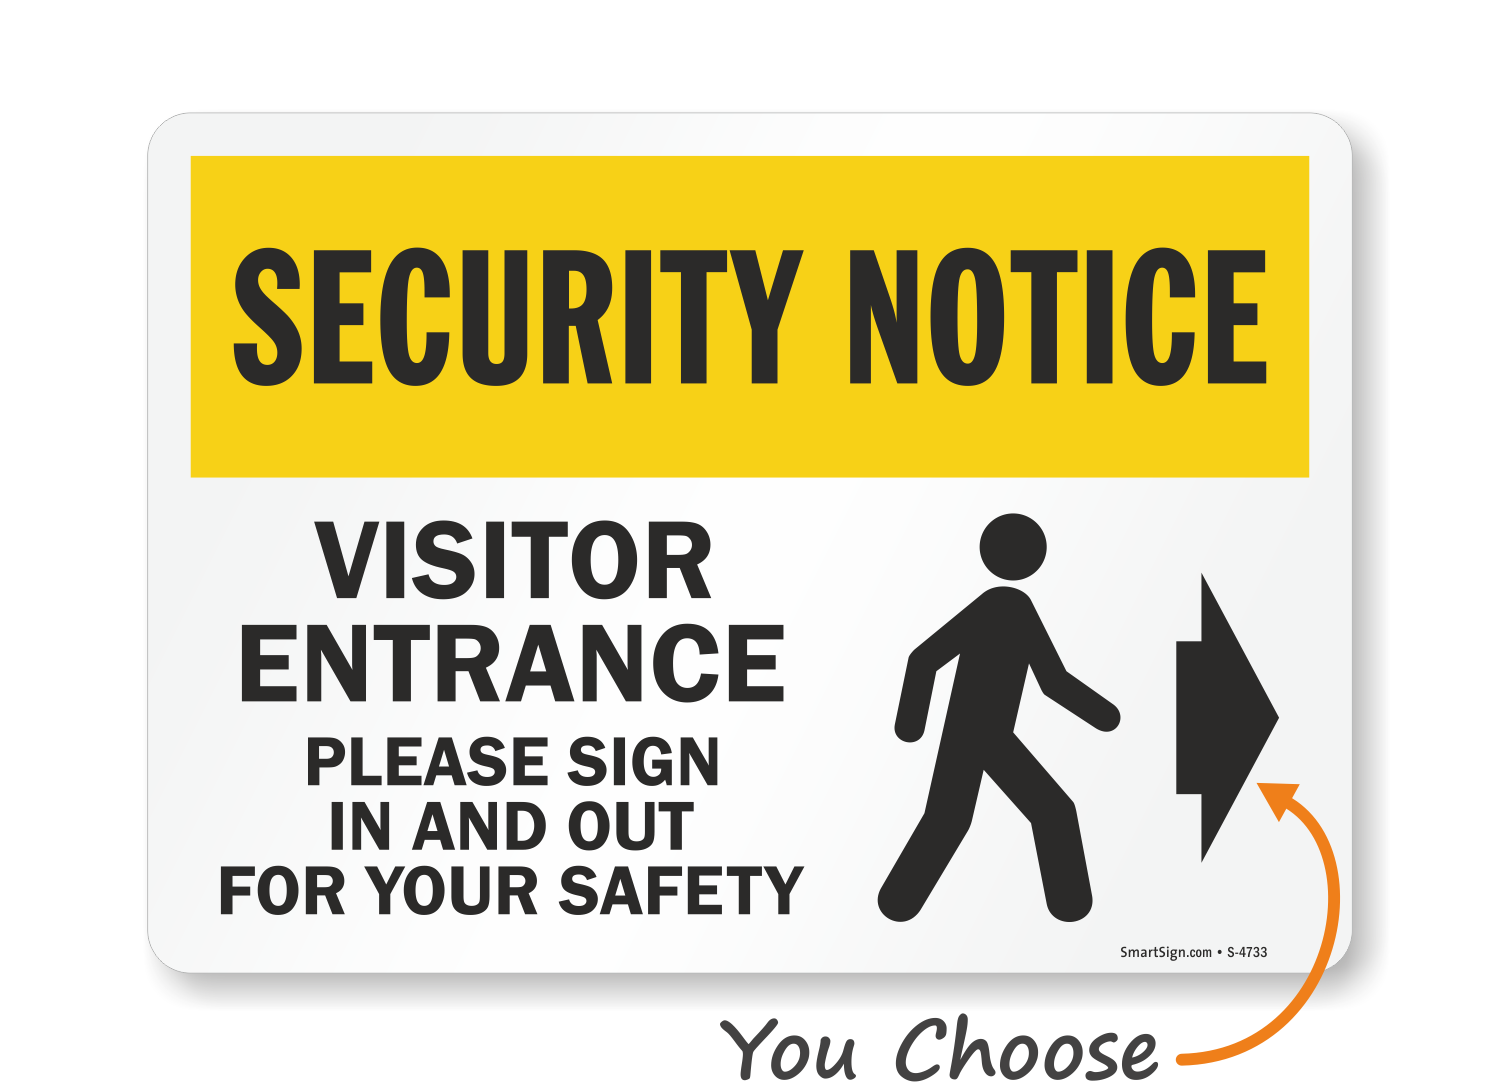 Please Sign In And Out For Your Safety Visitor Entrance SKU S 4733 R.